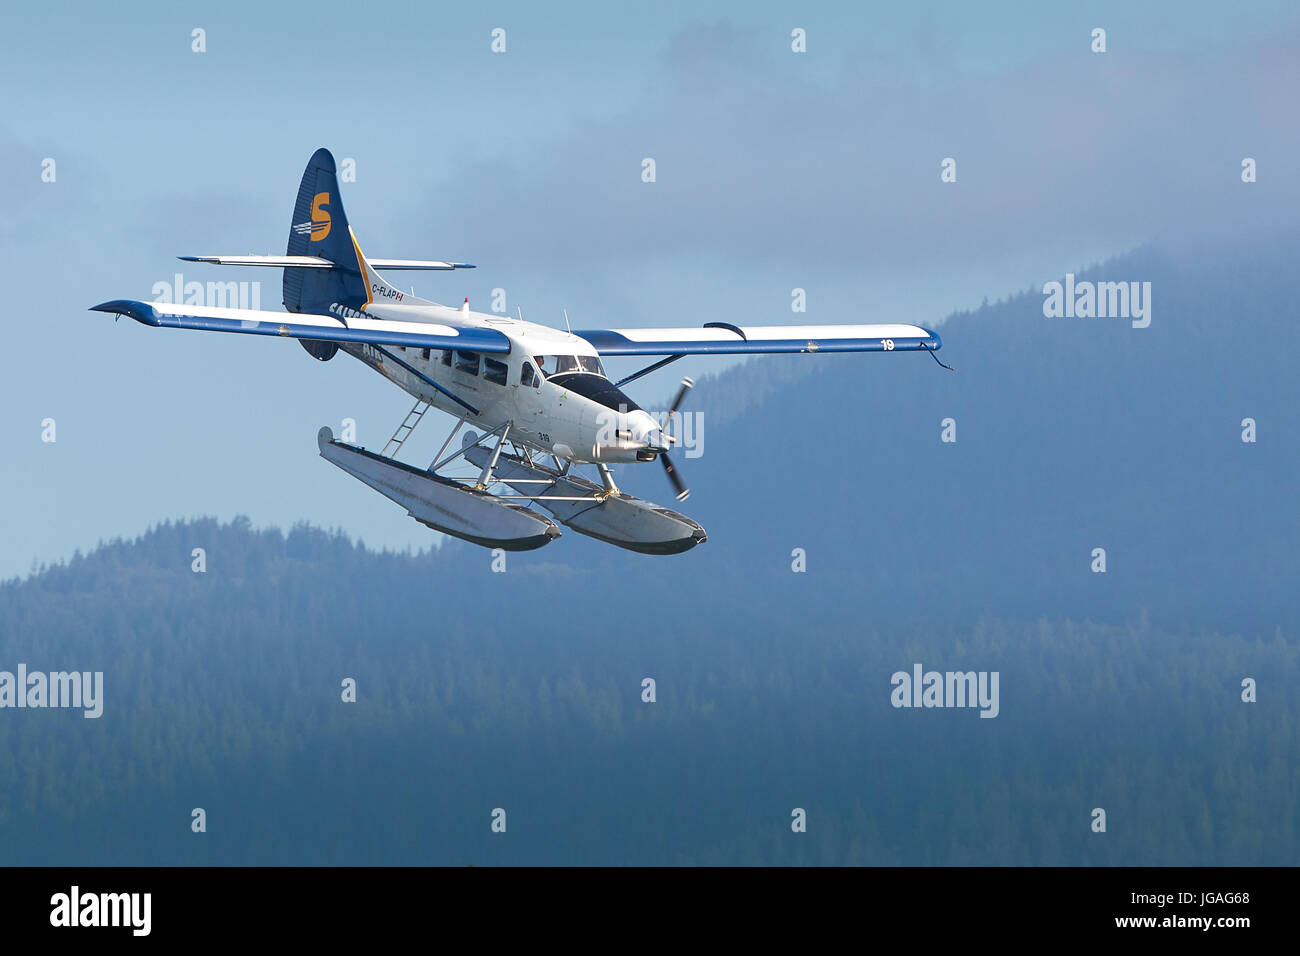 Harbour Air Turbo Otter Floatplane Approaching Vancouver Harbour, British Columbia, Canada. Stock Photo